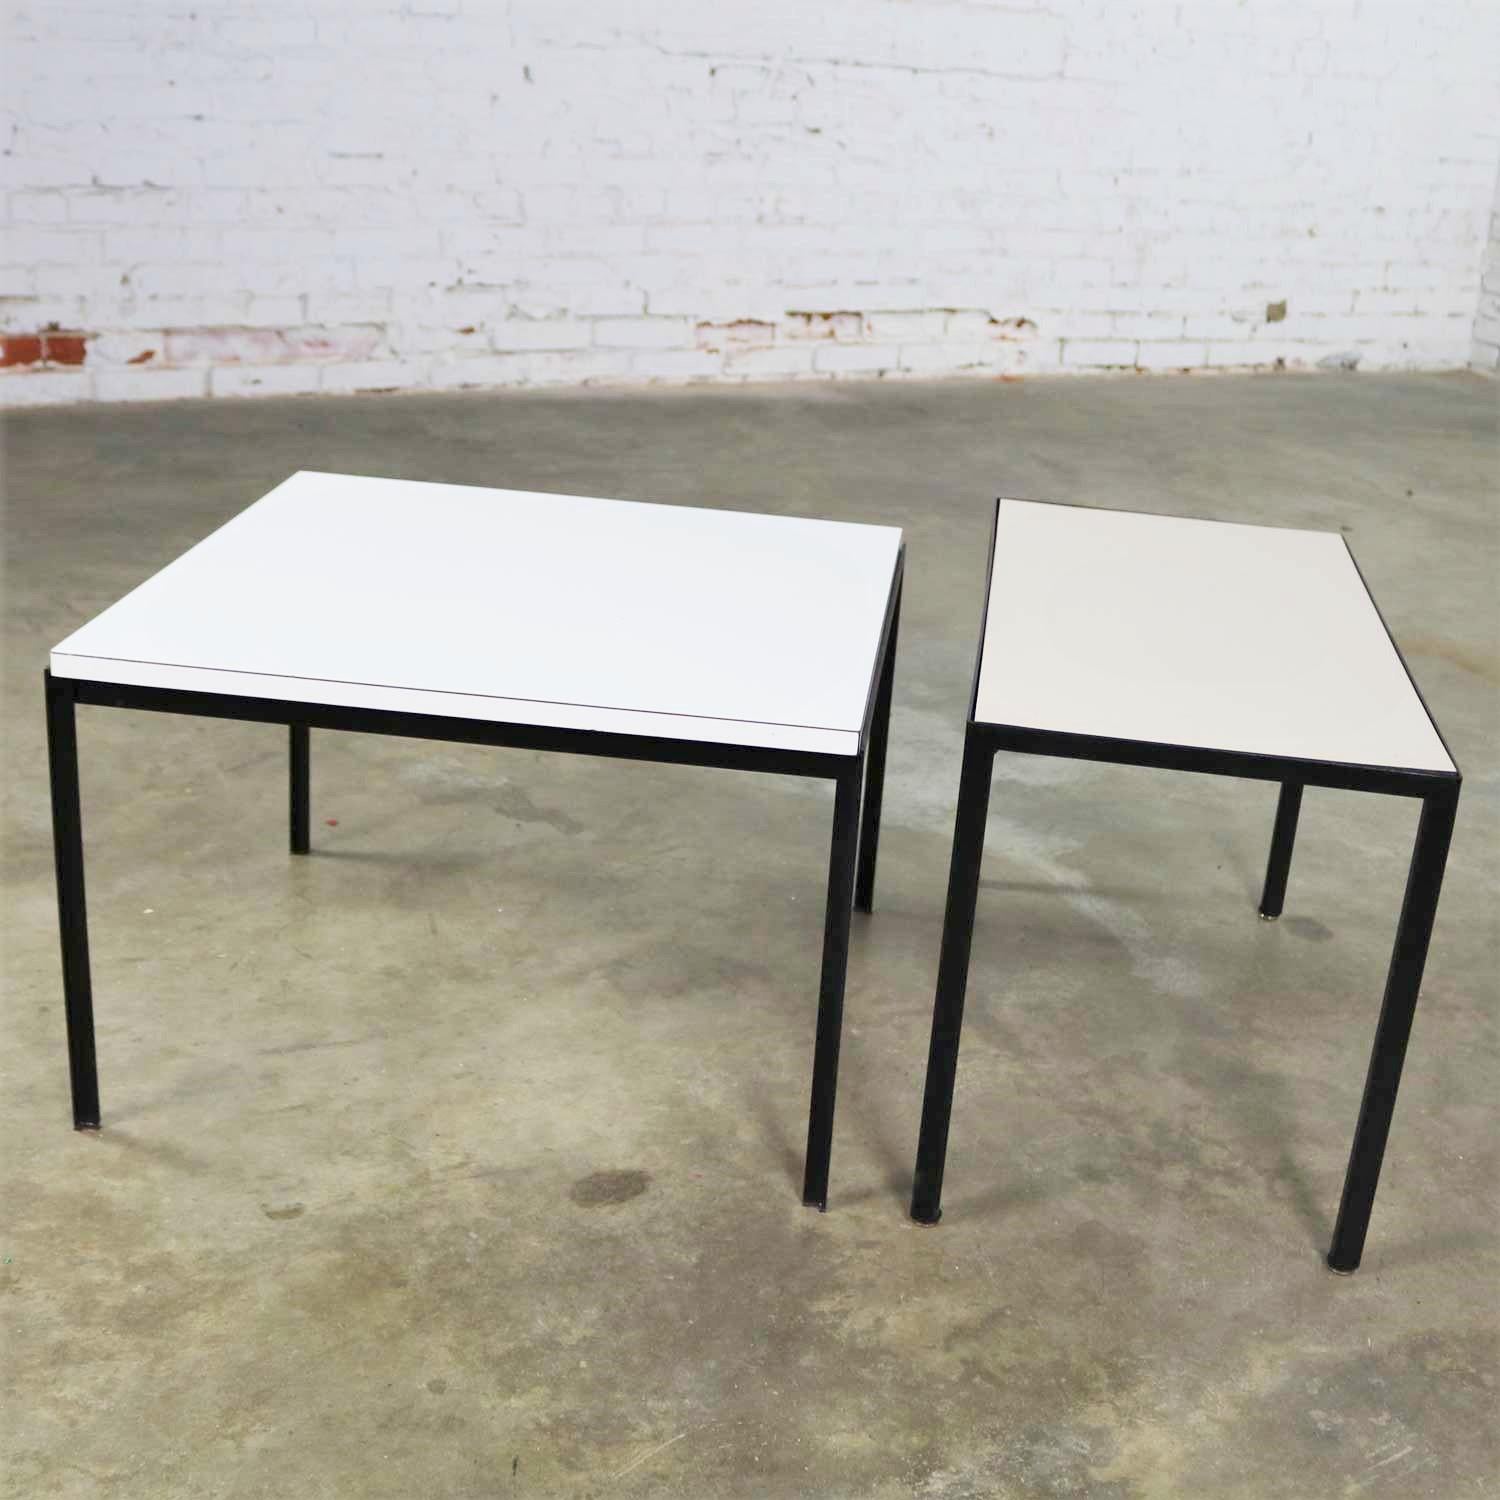 Great Mid-Century Modern black wrought iron side tables with laminate tops. They are miss matched in shape and size, so we have priced them separately. You may buy one or two. They are in wonderful vintage condition with no outstanding flaws we have